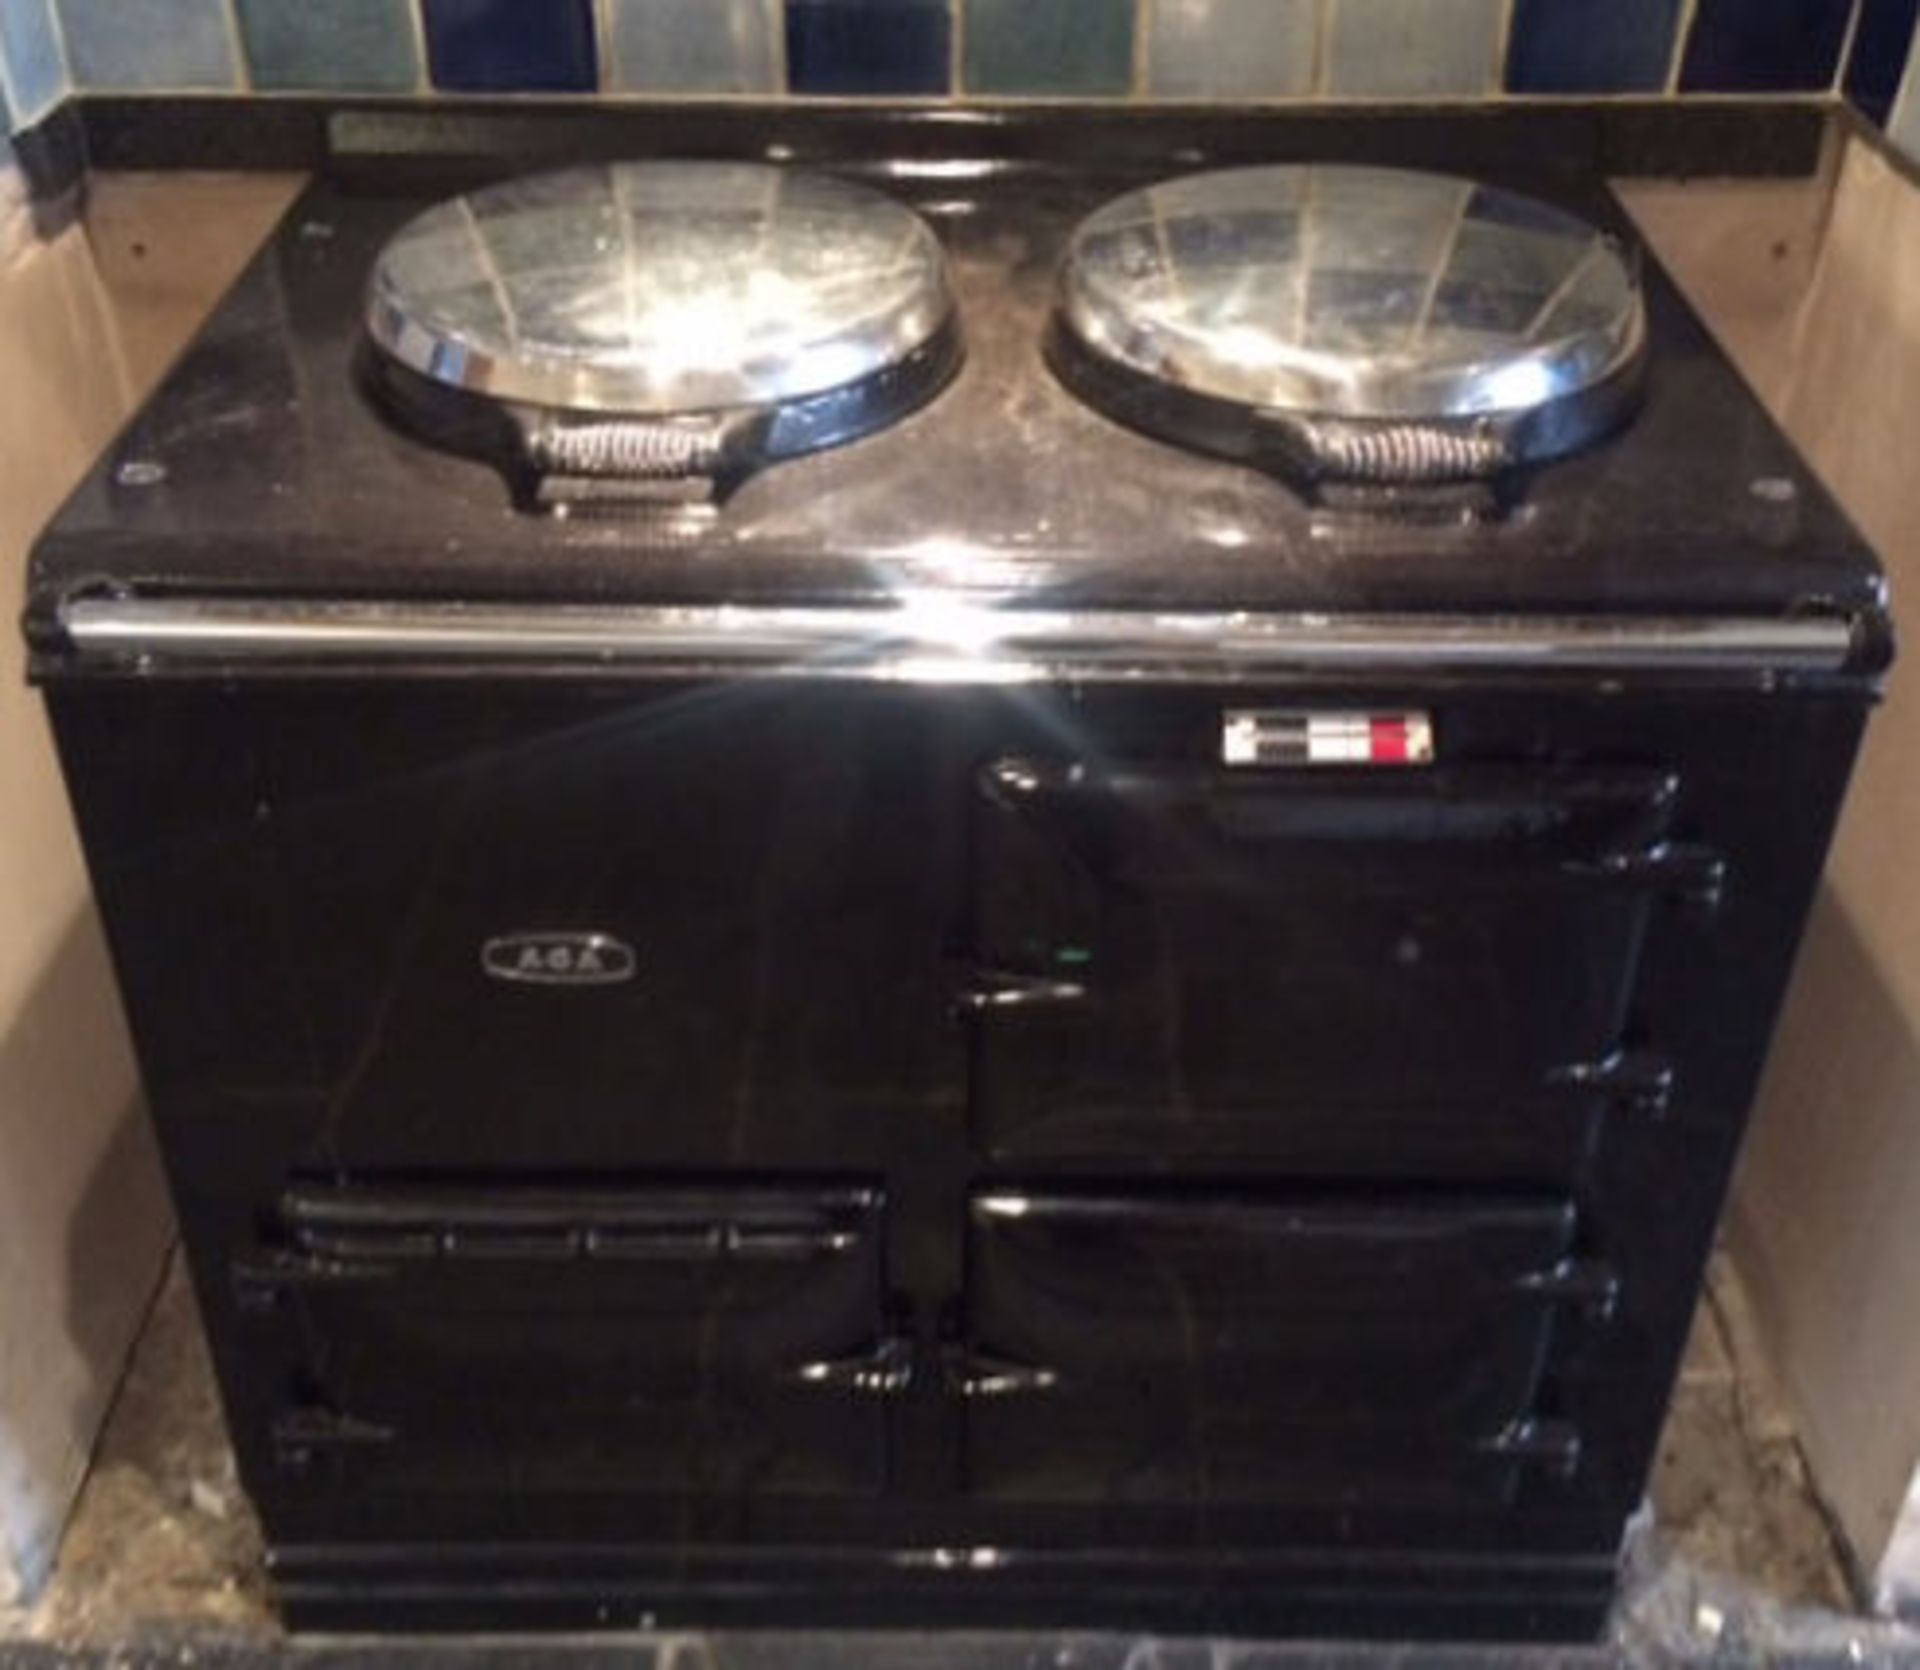 1 x Aga 2-Oven Gas Range Cooker - Cast Iron With Black Enamel Finish - Preowned In Good Working Cond - Image 7 of 10